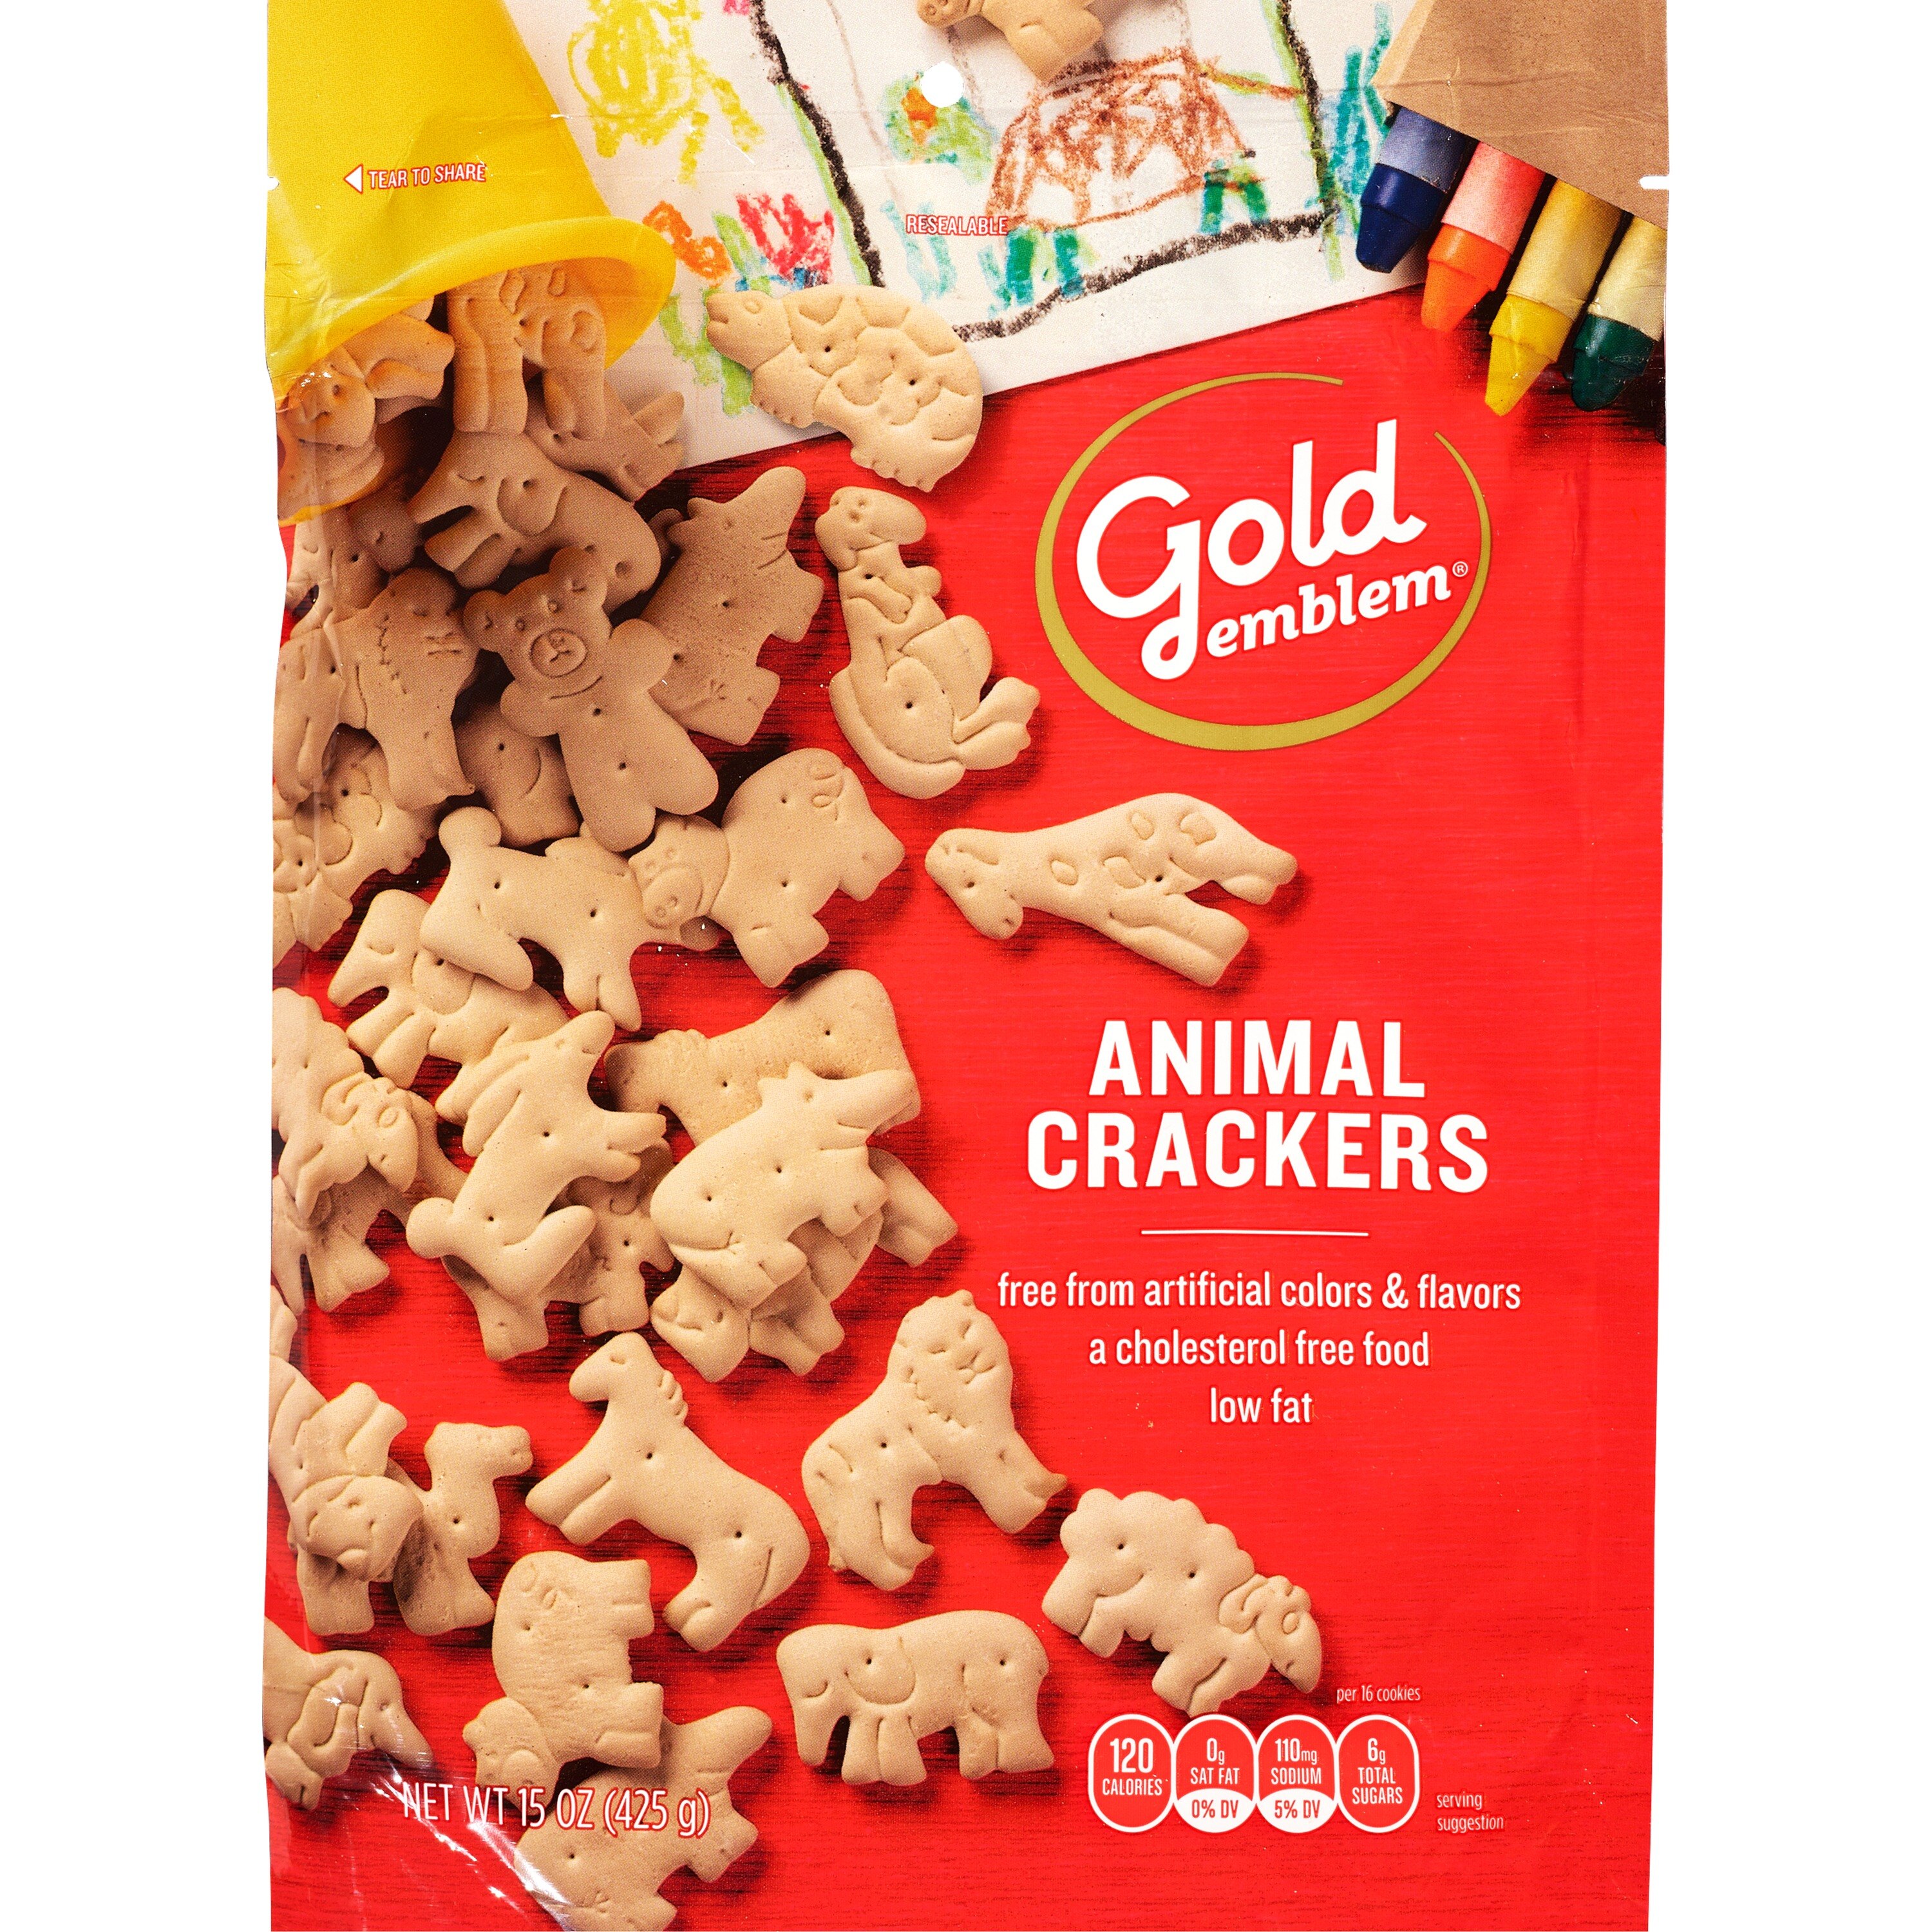 Gold Emblem Animal Crackers, 15 OZ | Pick Up In Store TODAY at CVS